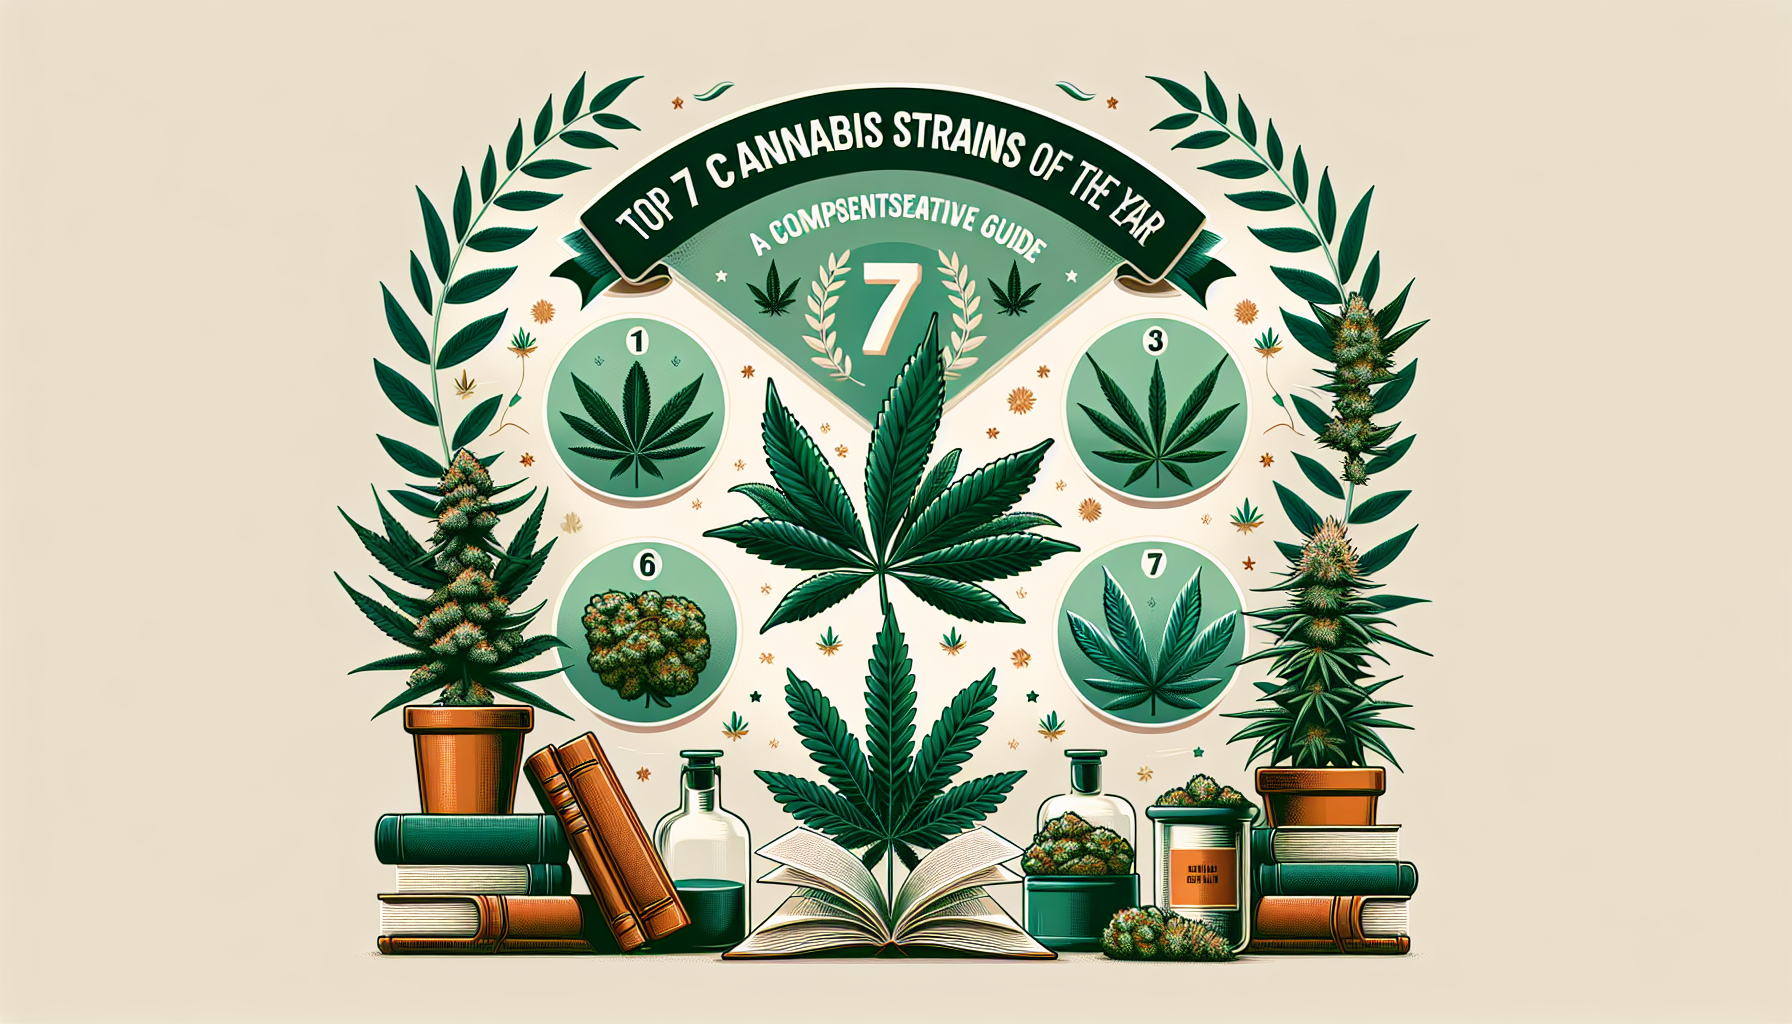 Top 7 Cannabis Strains of the Year: A Comprehensive Guide - The Johnny Seeds Bank